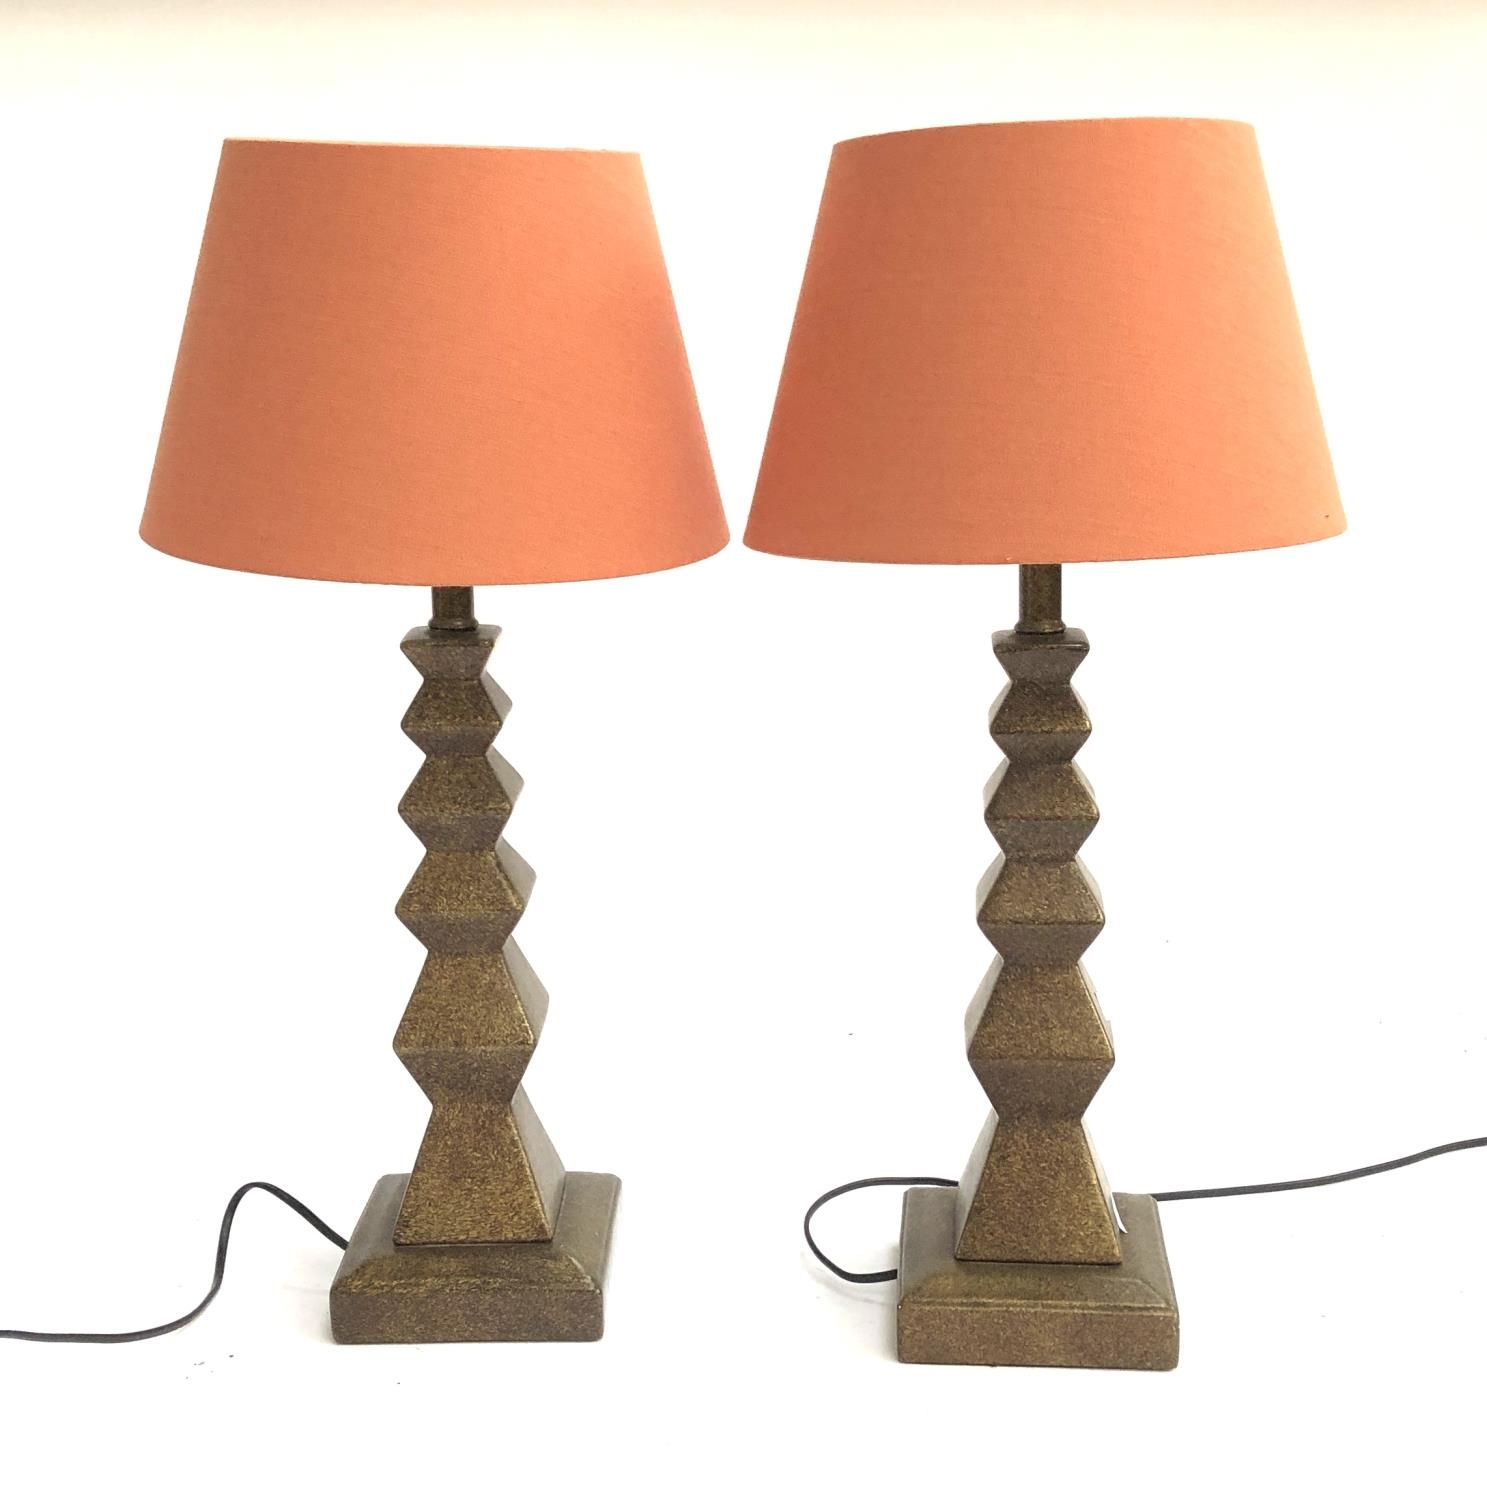 A pair of square concertina table lamps by Gourmet's Pride Ltd, 62cmH to top of shade